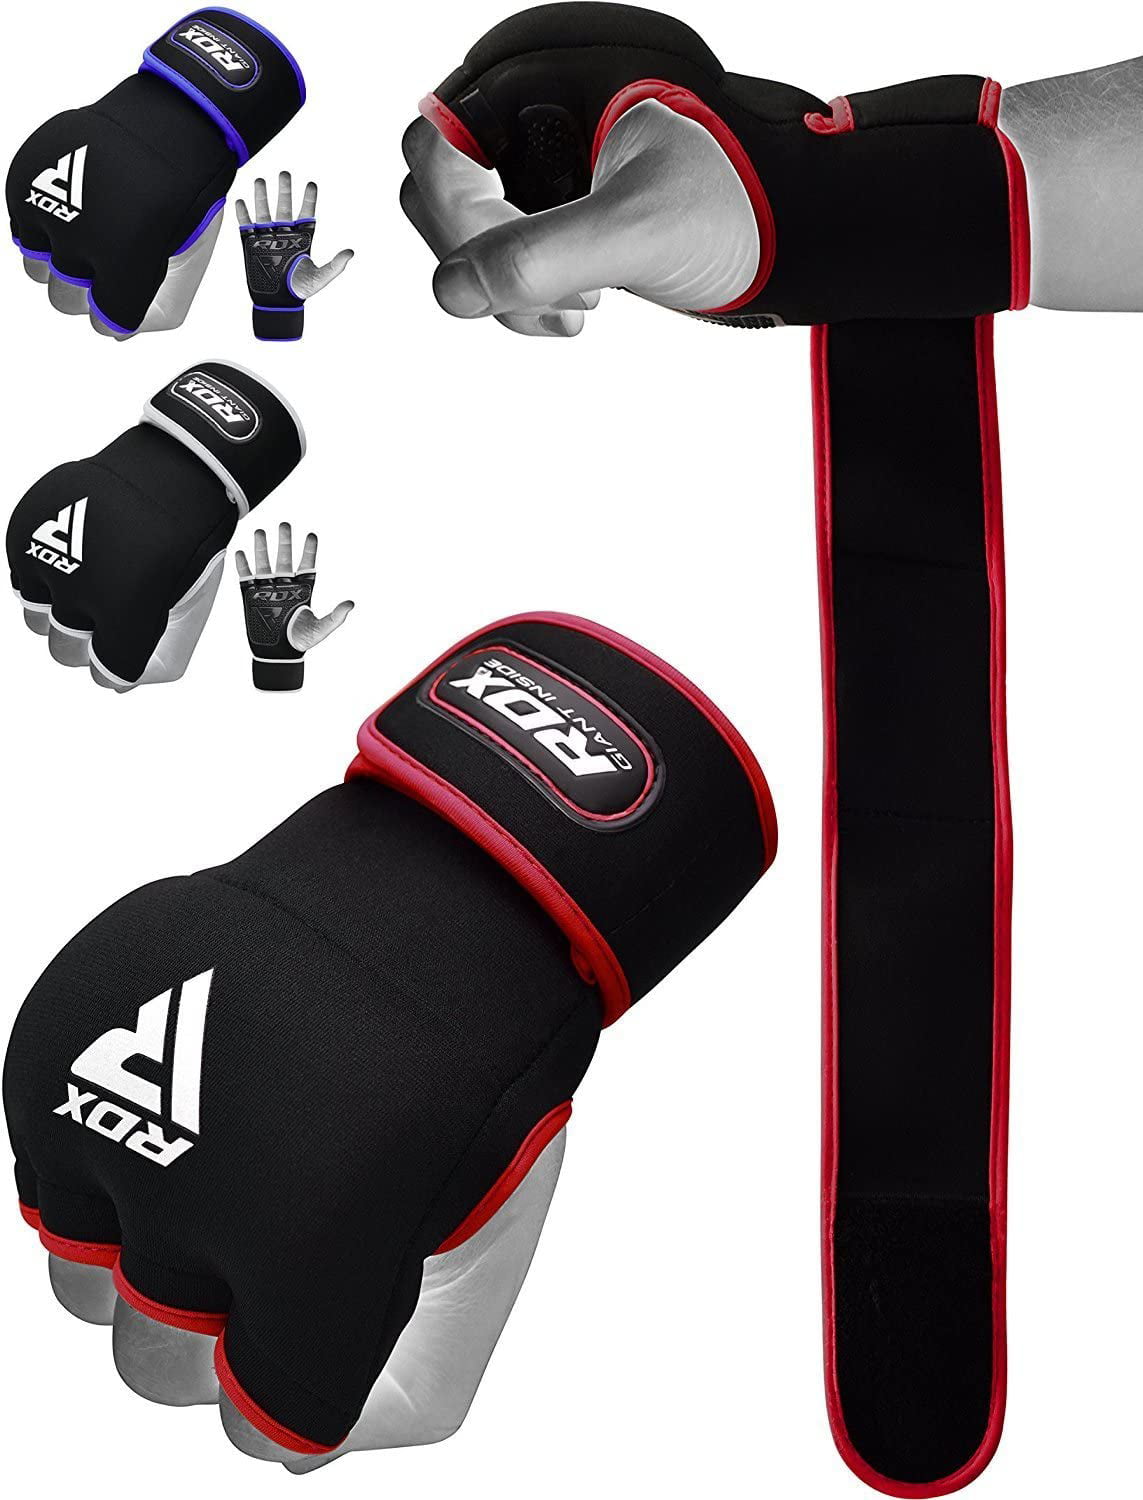 MMA Wrist Support Bandage Wraps Boxing Hand Protector Inner Straps Fist Gloves 